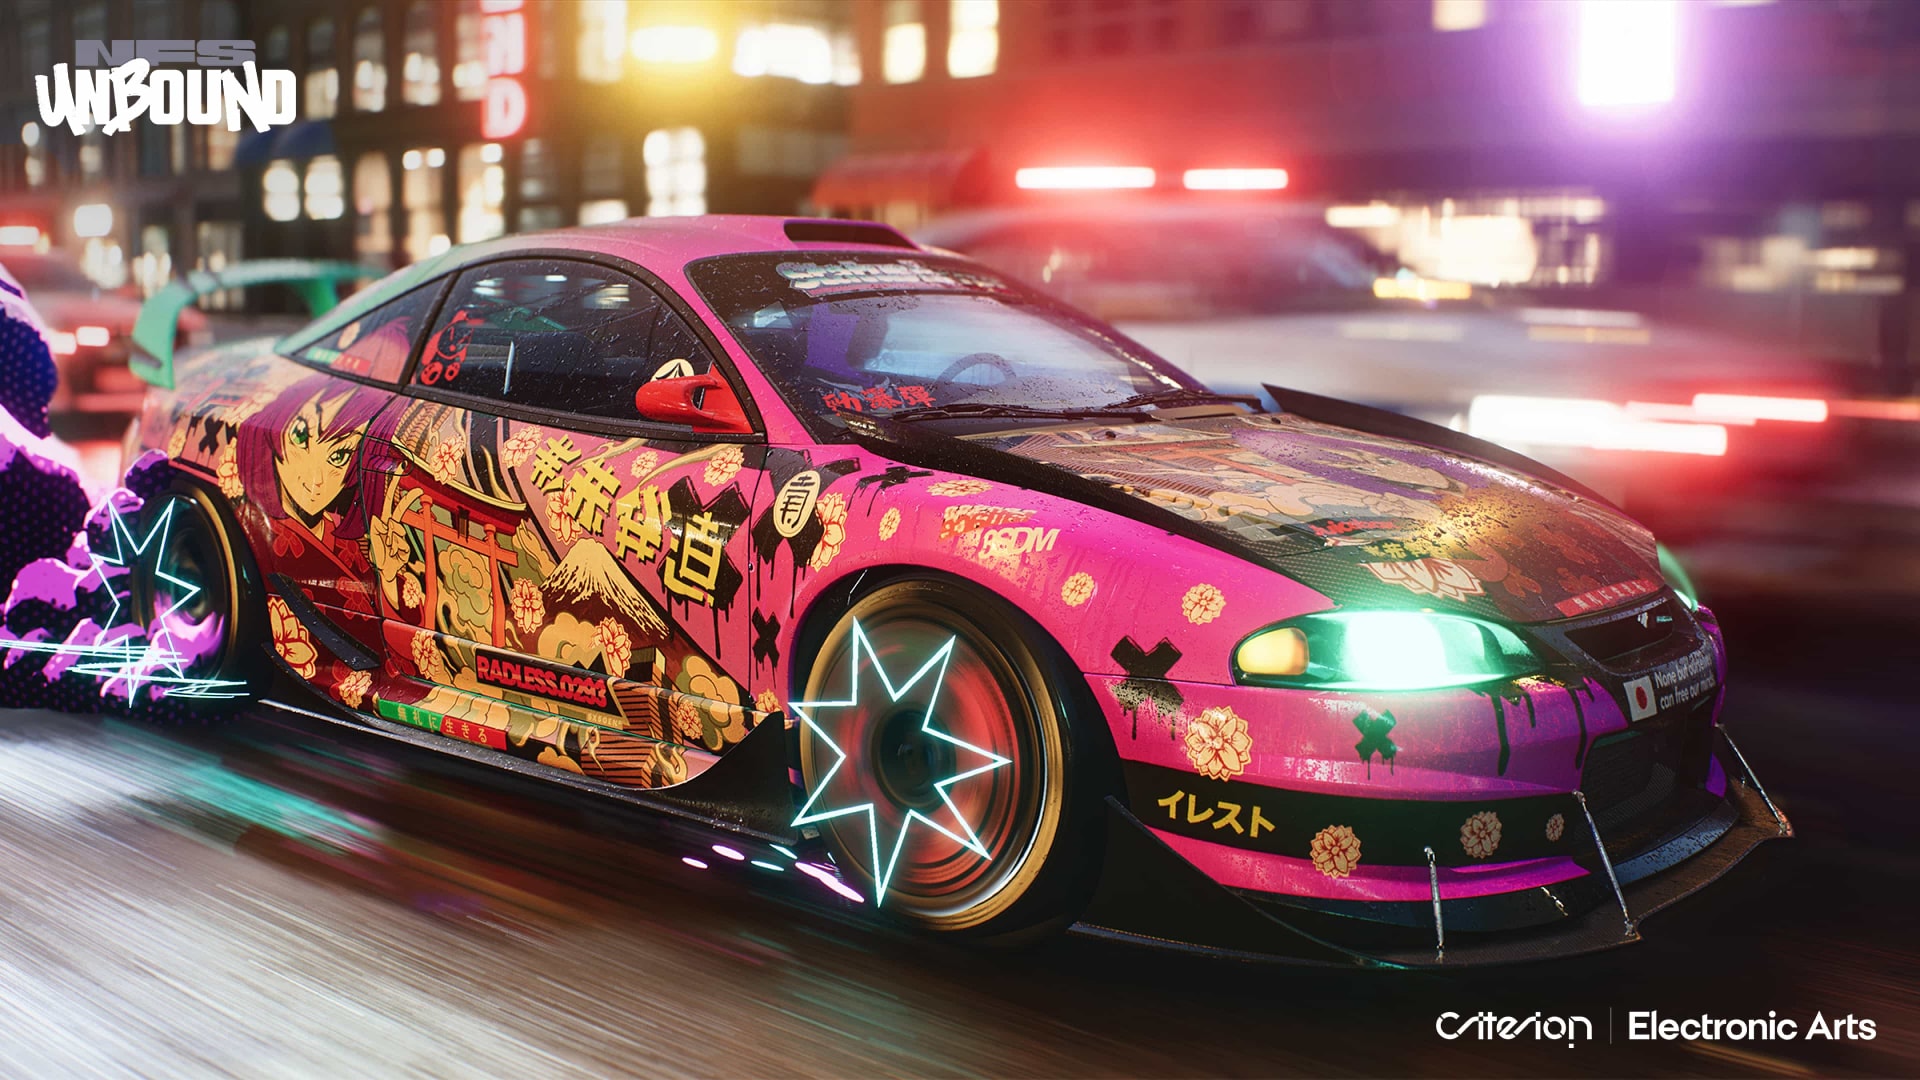 Need for Speed Unbound: Codemasters team helped increase quality